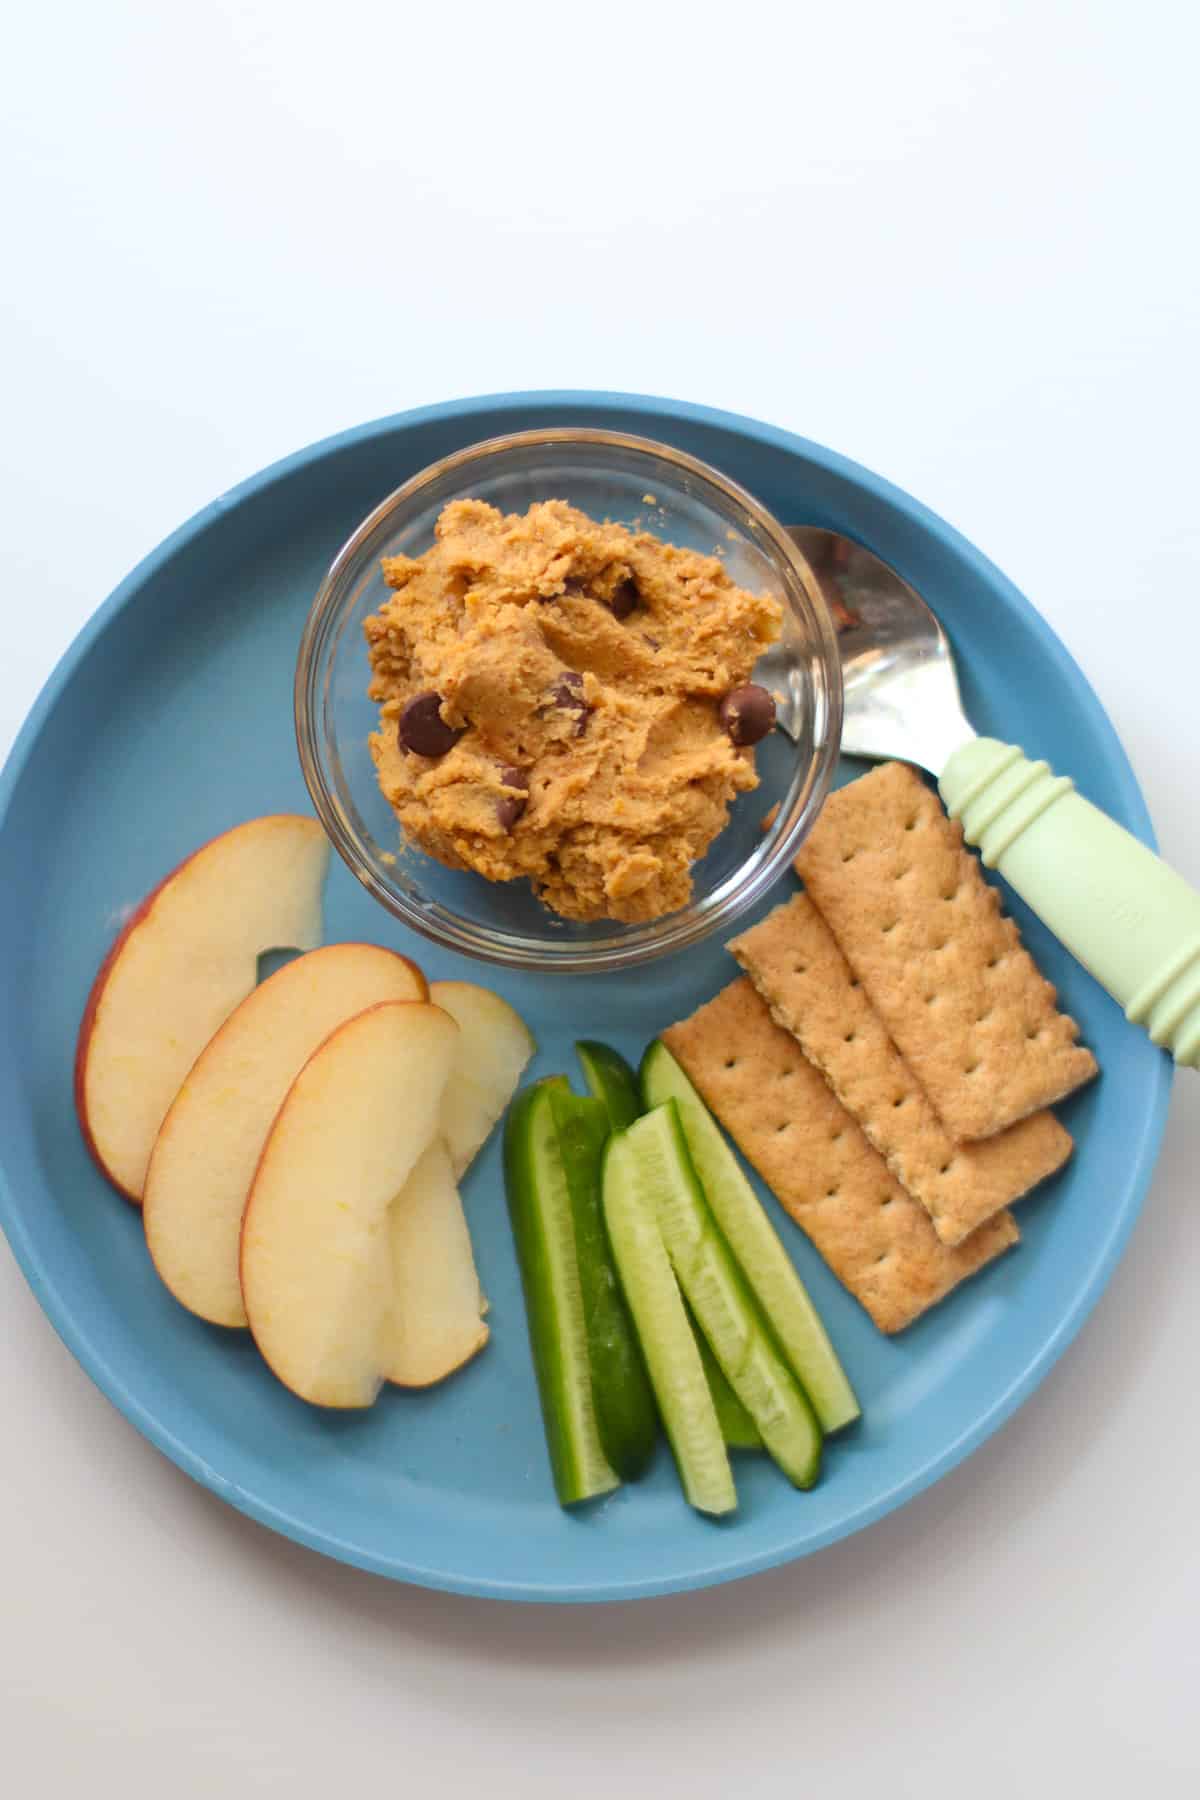 A snack plate with the chickpea cookie dough, apples, cucumber, and graham crackers.